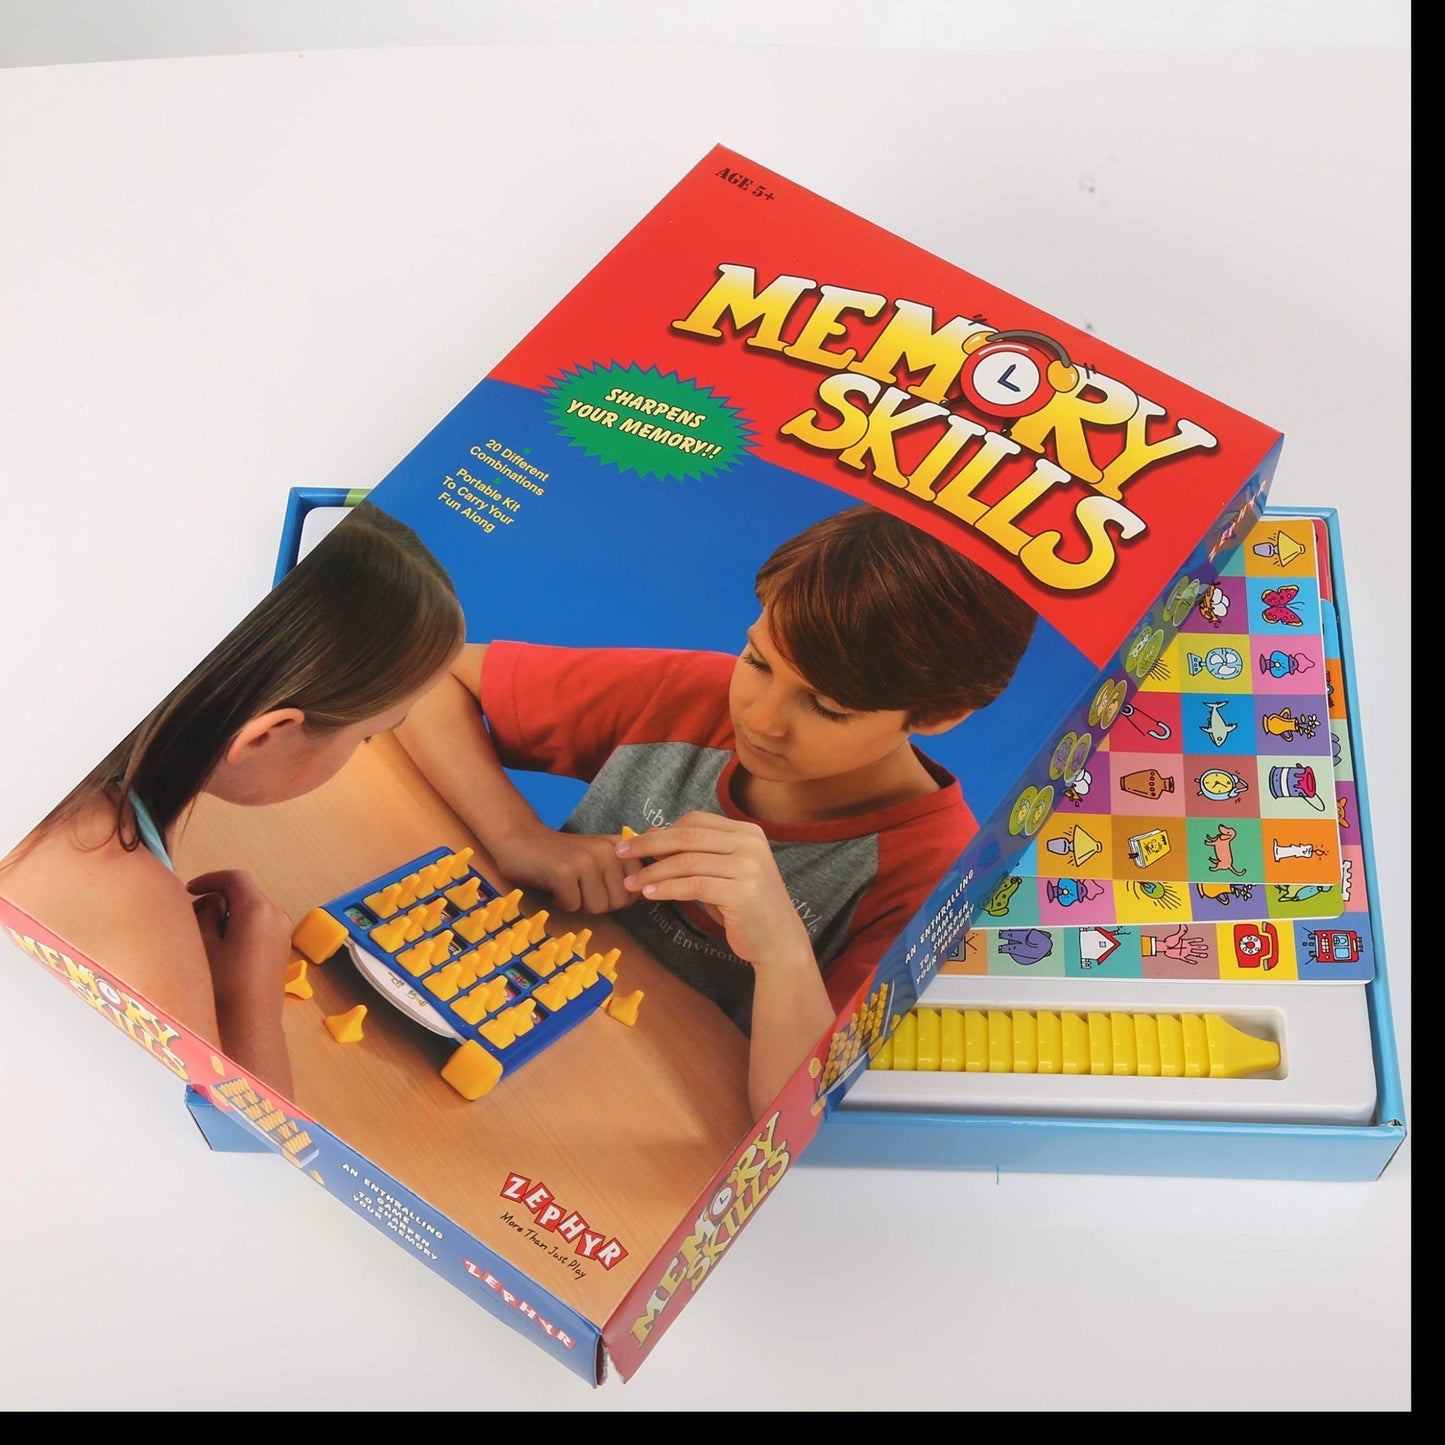 Memory Skill Picture Matching Memory Game for Kids